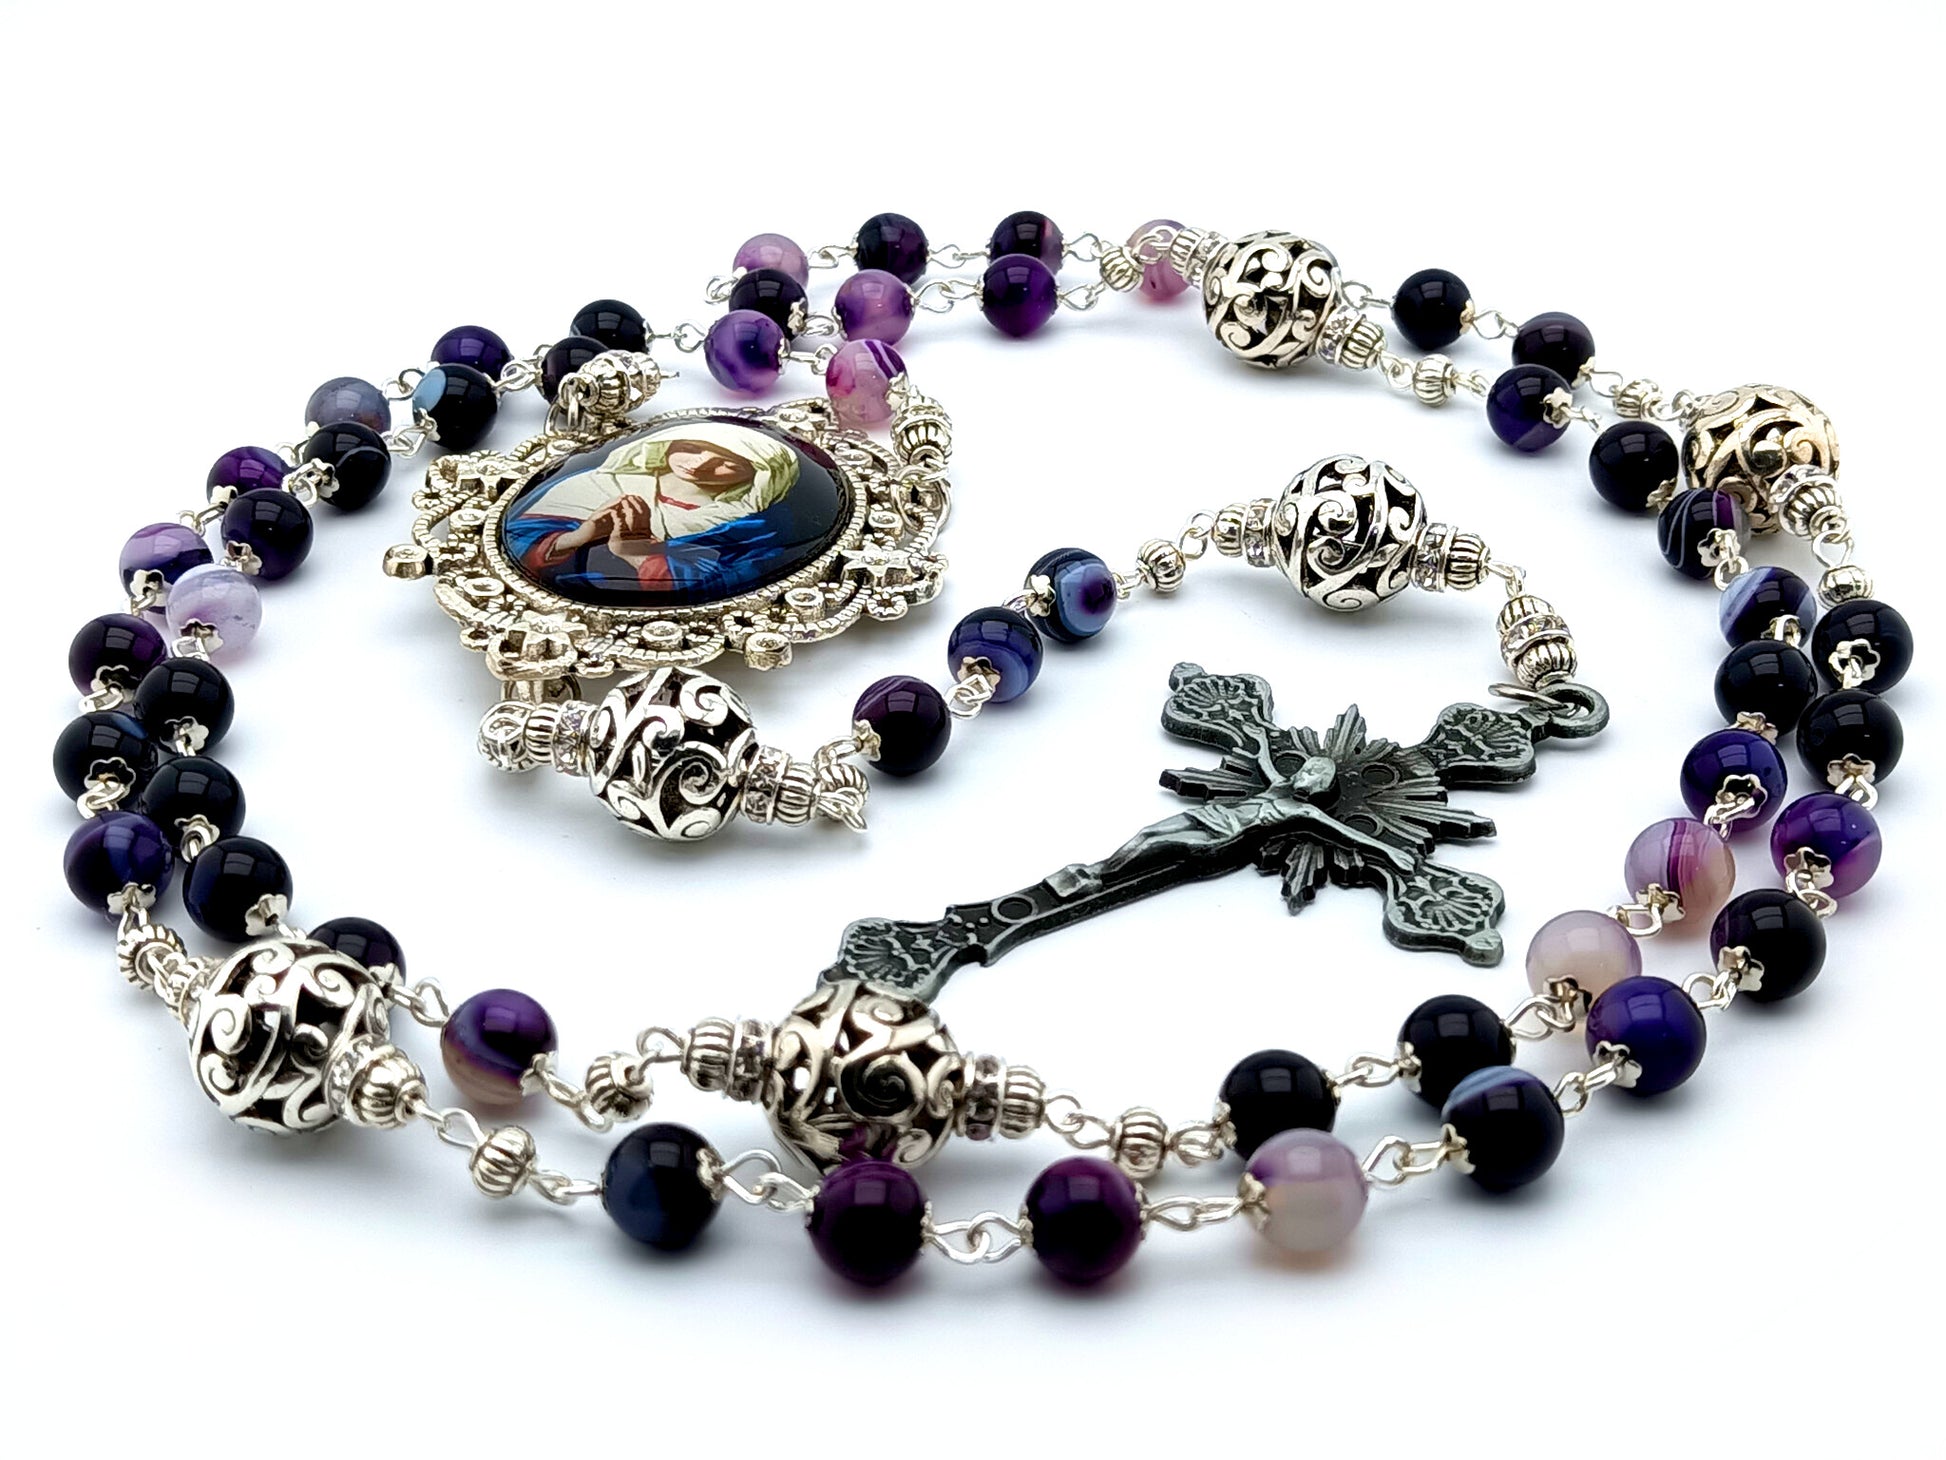 Virgin Mary unique rosary beads with purple agate gemstone beads, silver pater beads and picture centre medal and pewter crucifix.